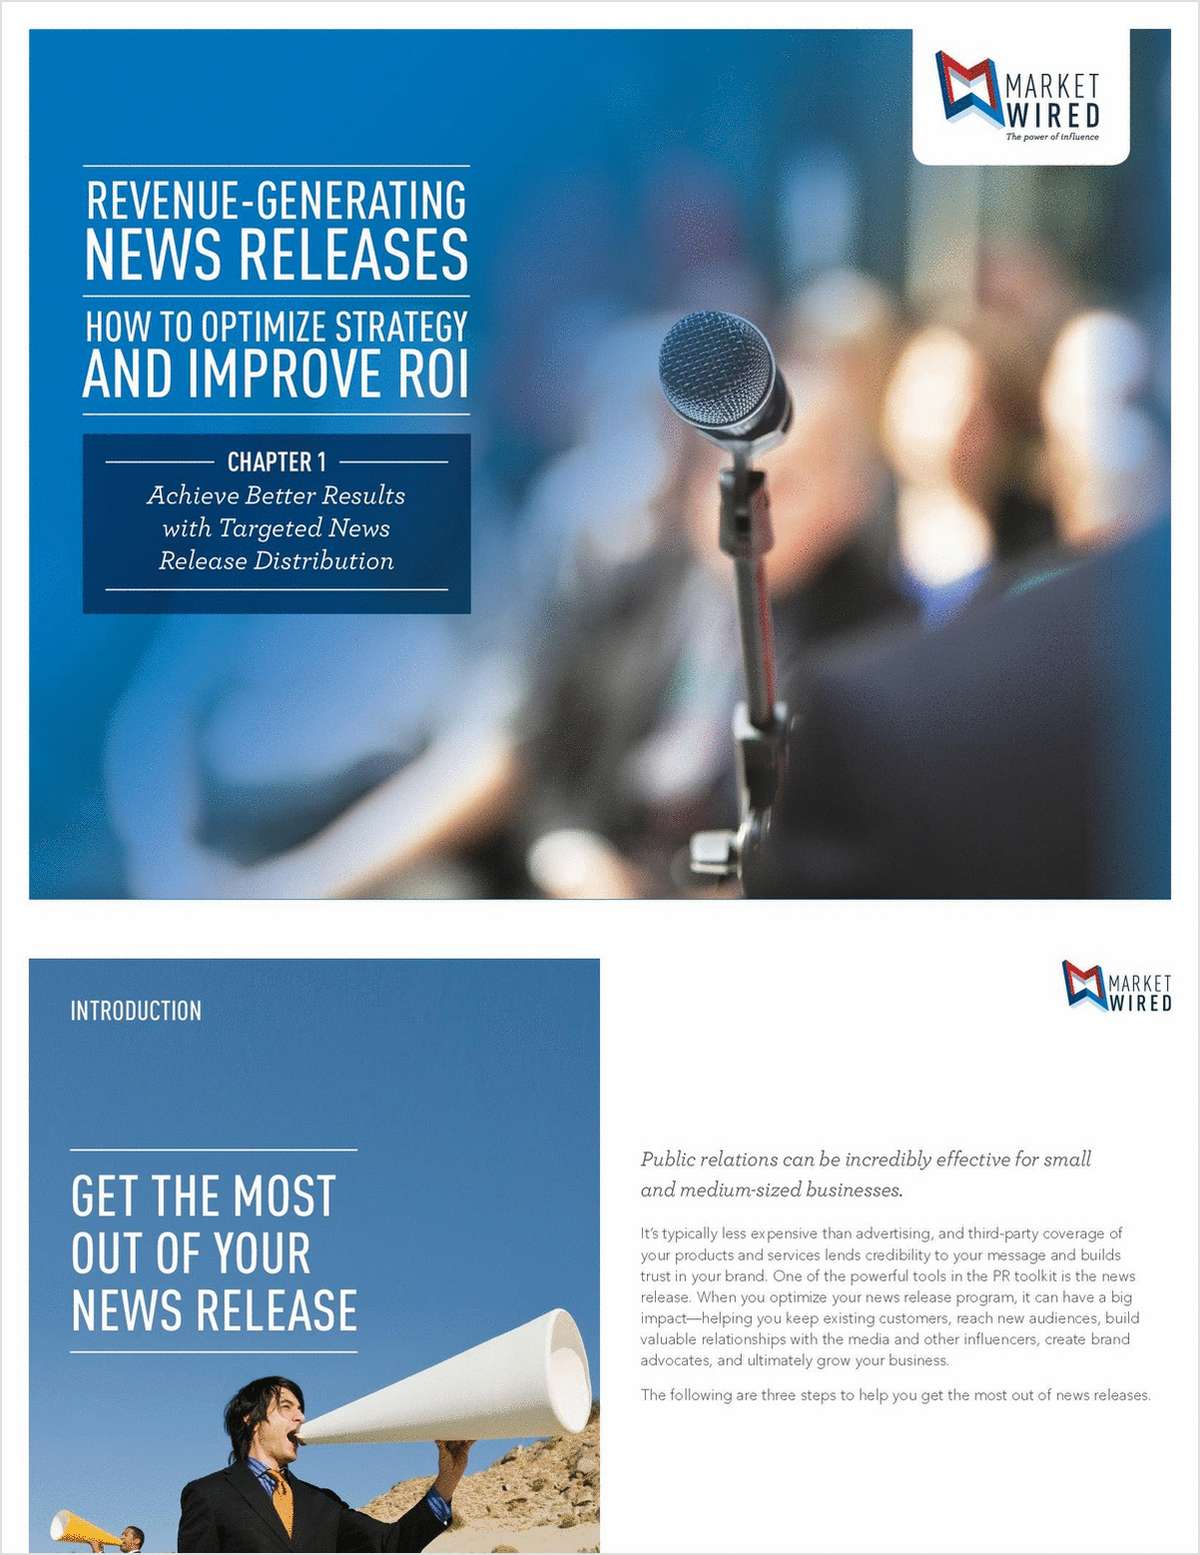 Revenue Generating News Releases: How to Optimize Strategy and Improve ROI